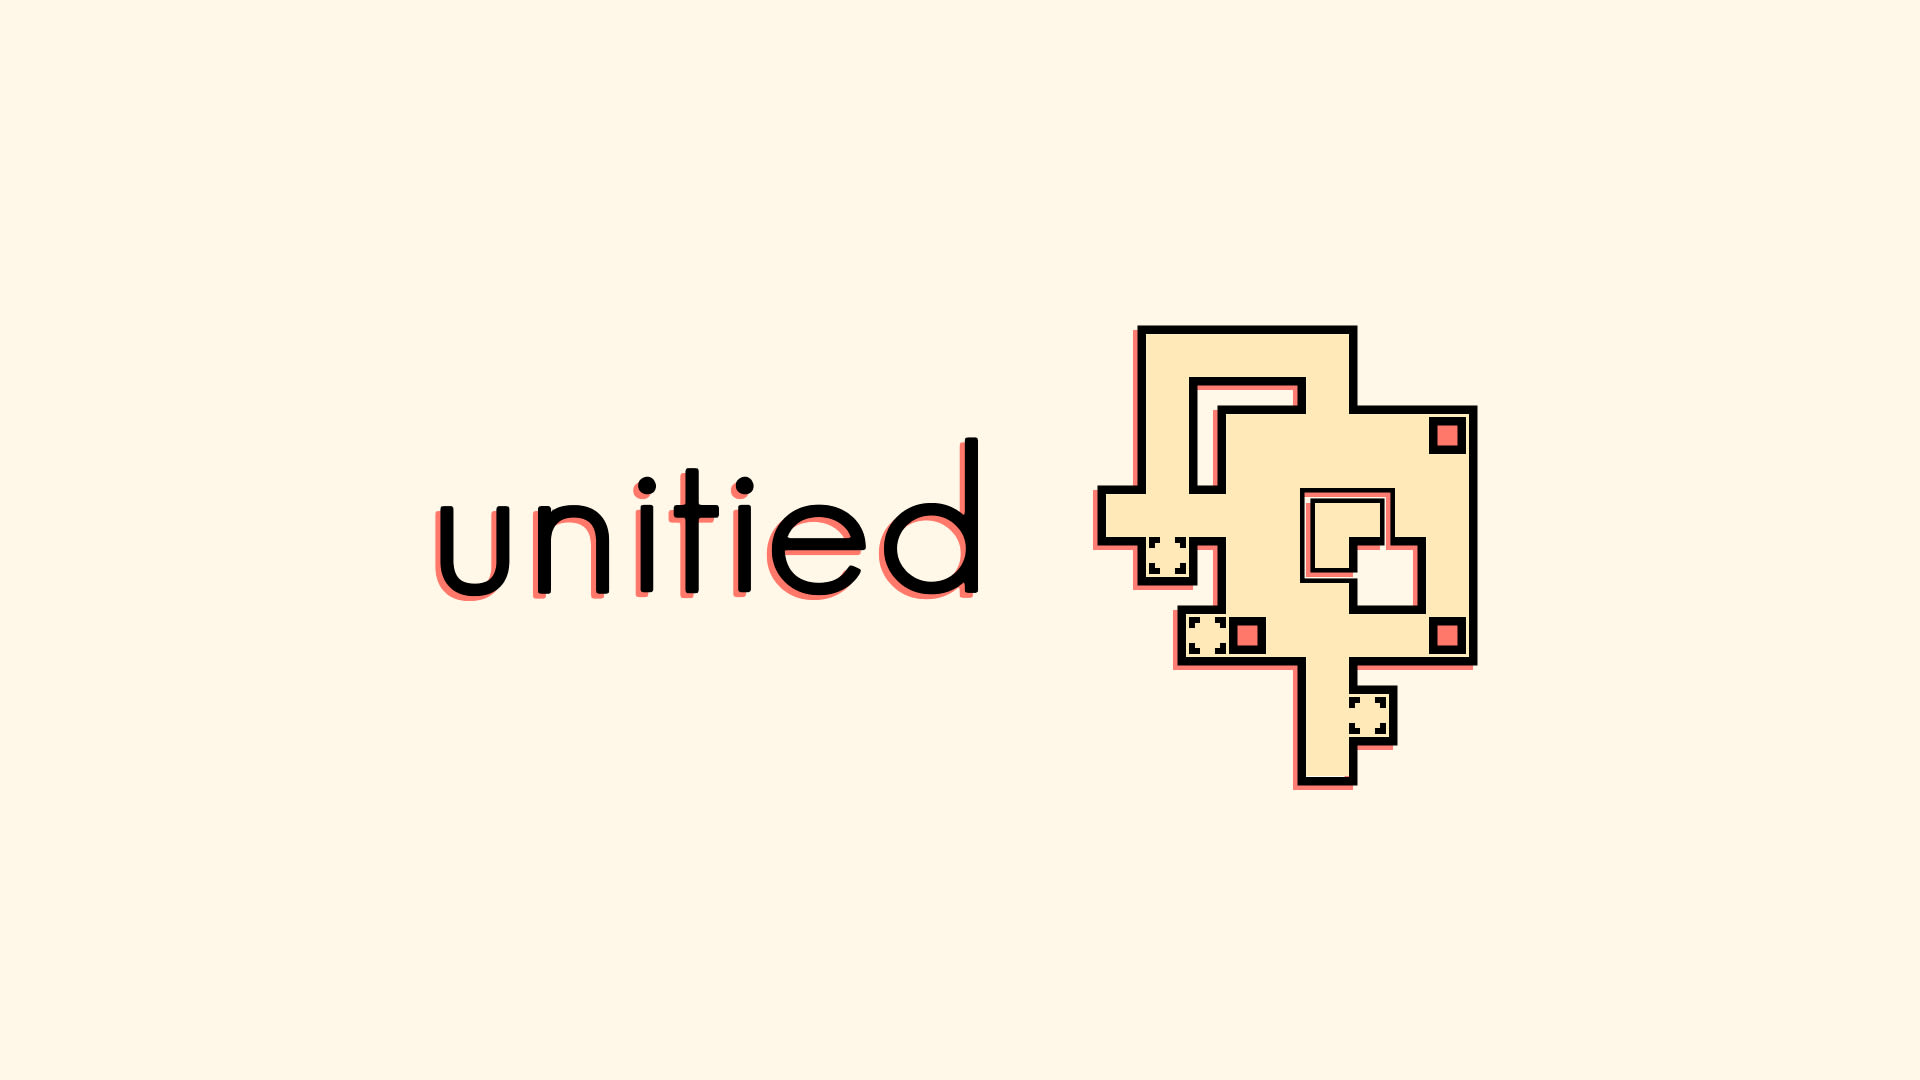 Unitied